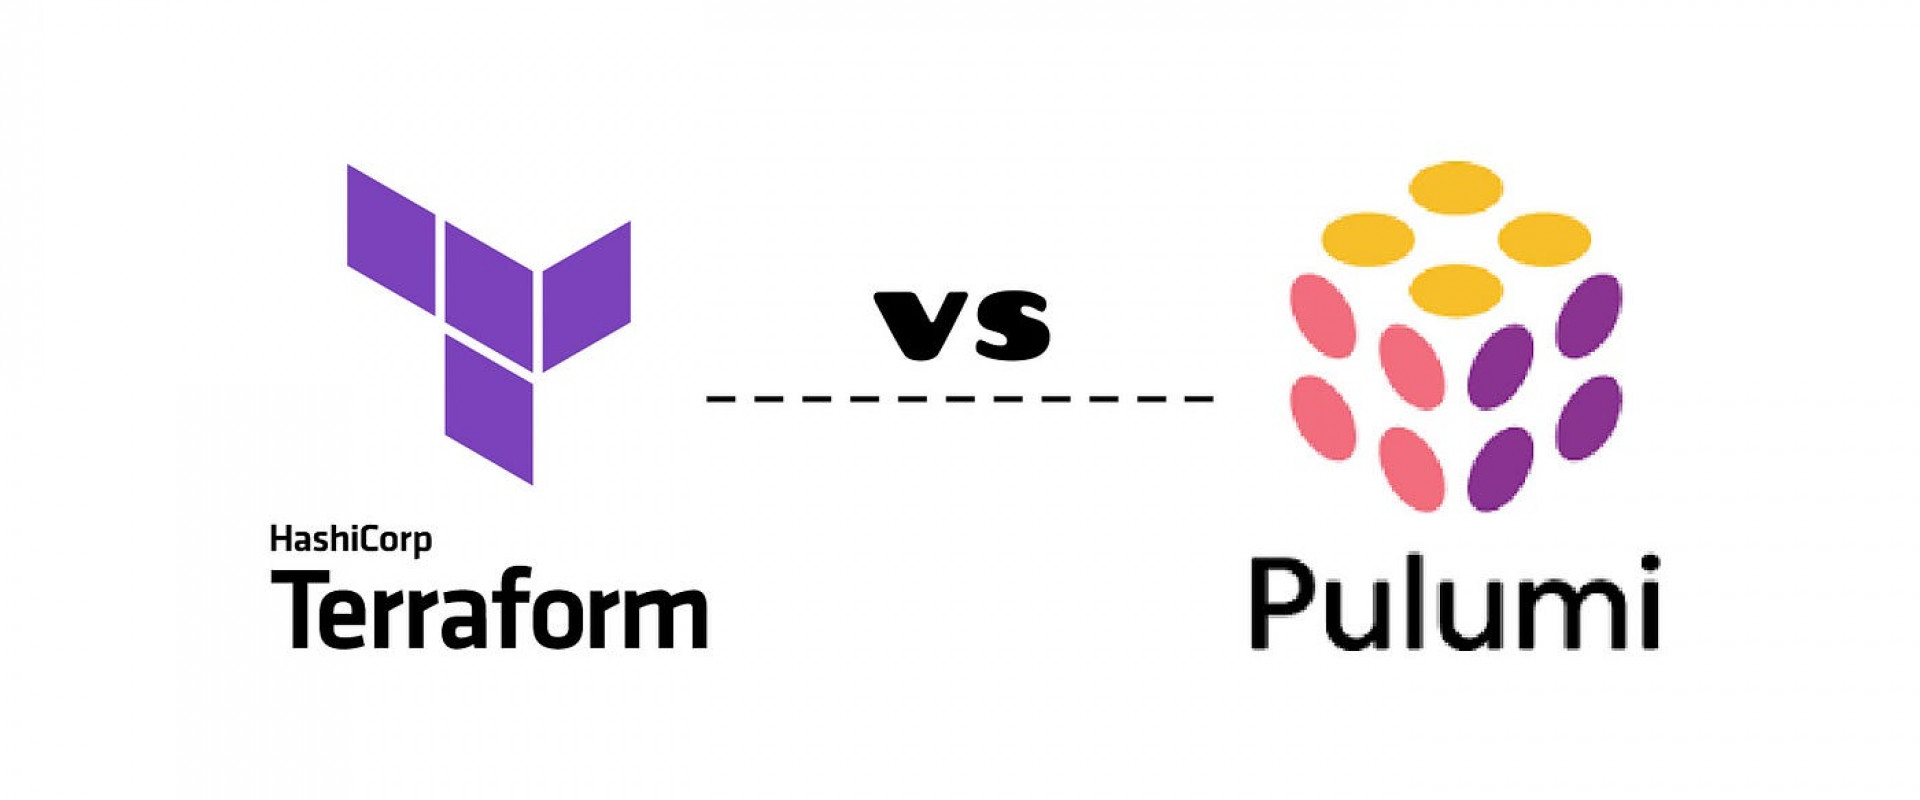 Terraform vs. Pulumi: Which Is Better for Your IaC Requirements?